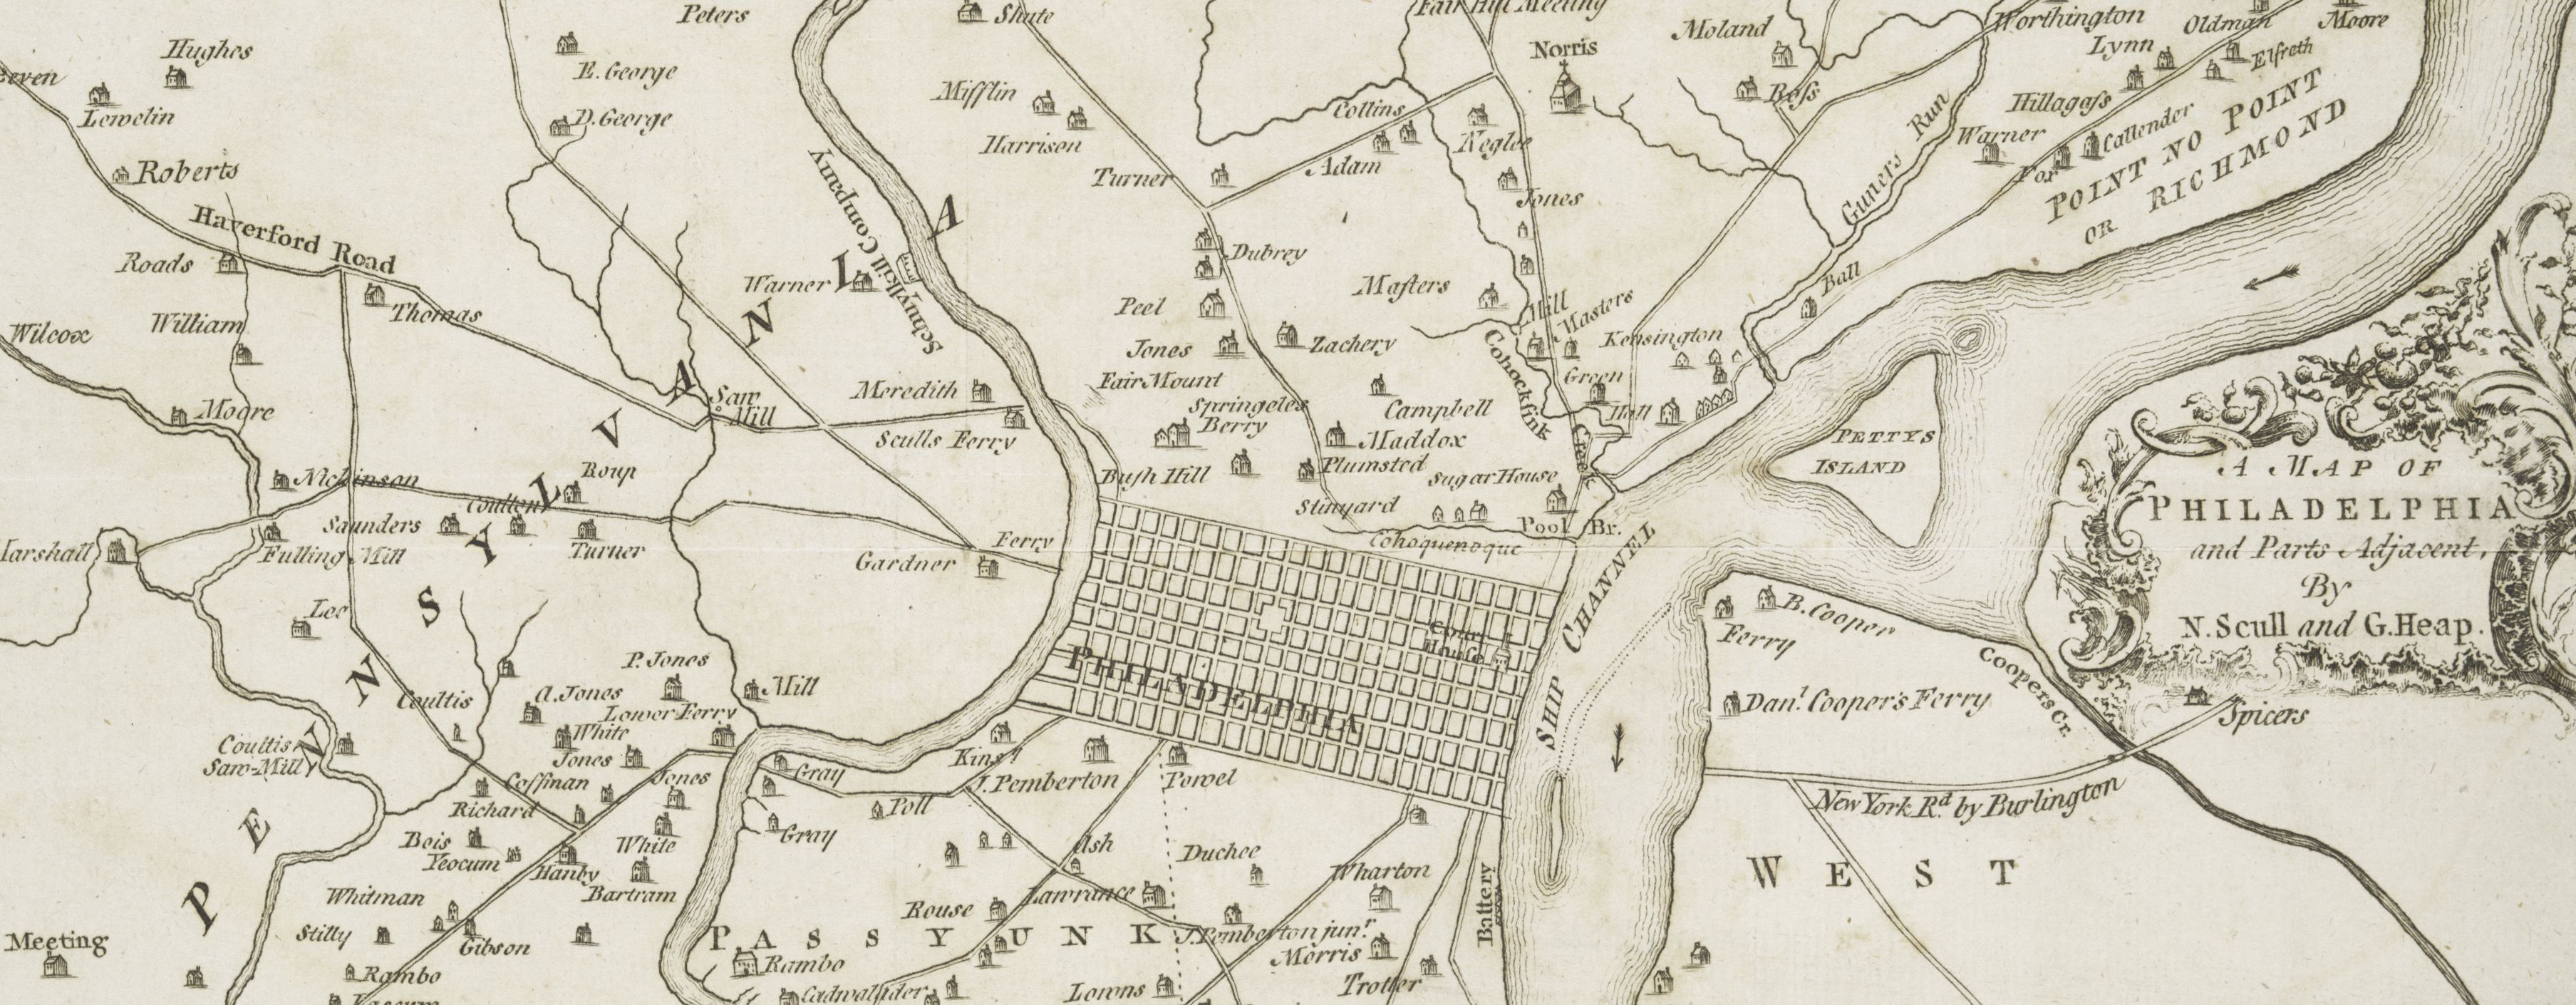 Detail of a black and white map of the city of Philadelphia and its closest suburbs. The city appears as a tight rectangular grid while the suburbs consist of scattered houses labeled with the names of their owners.